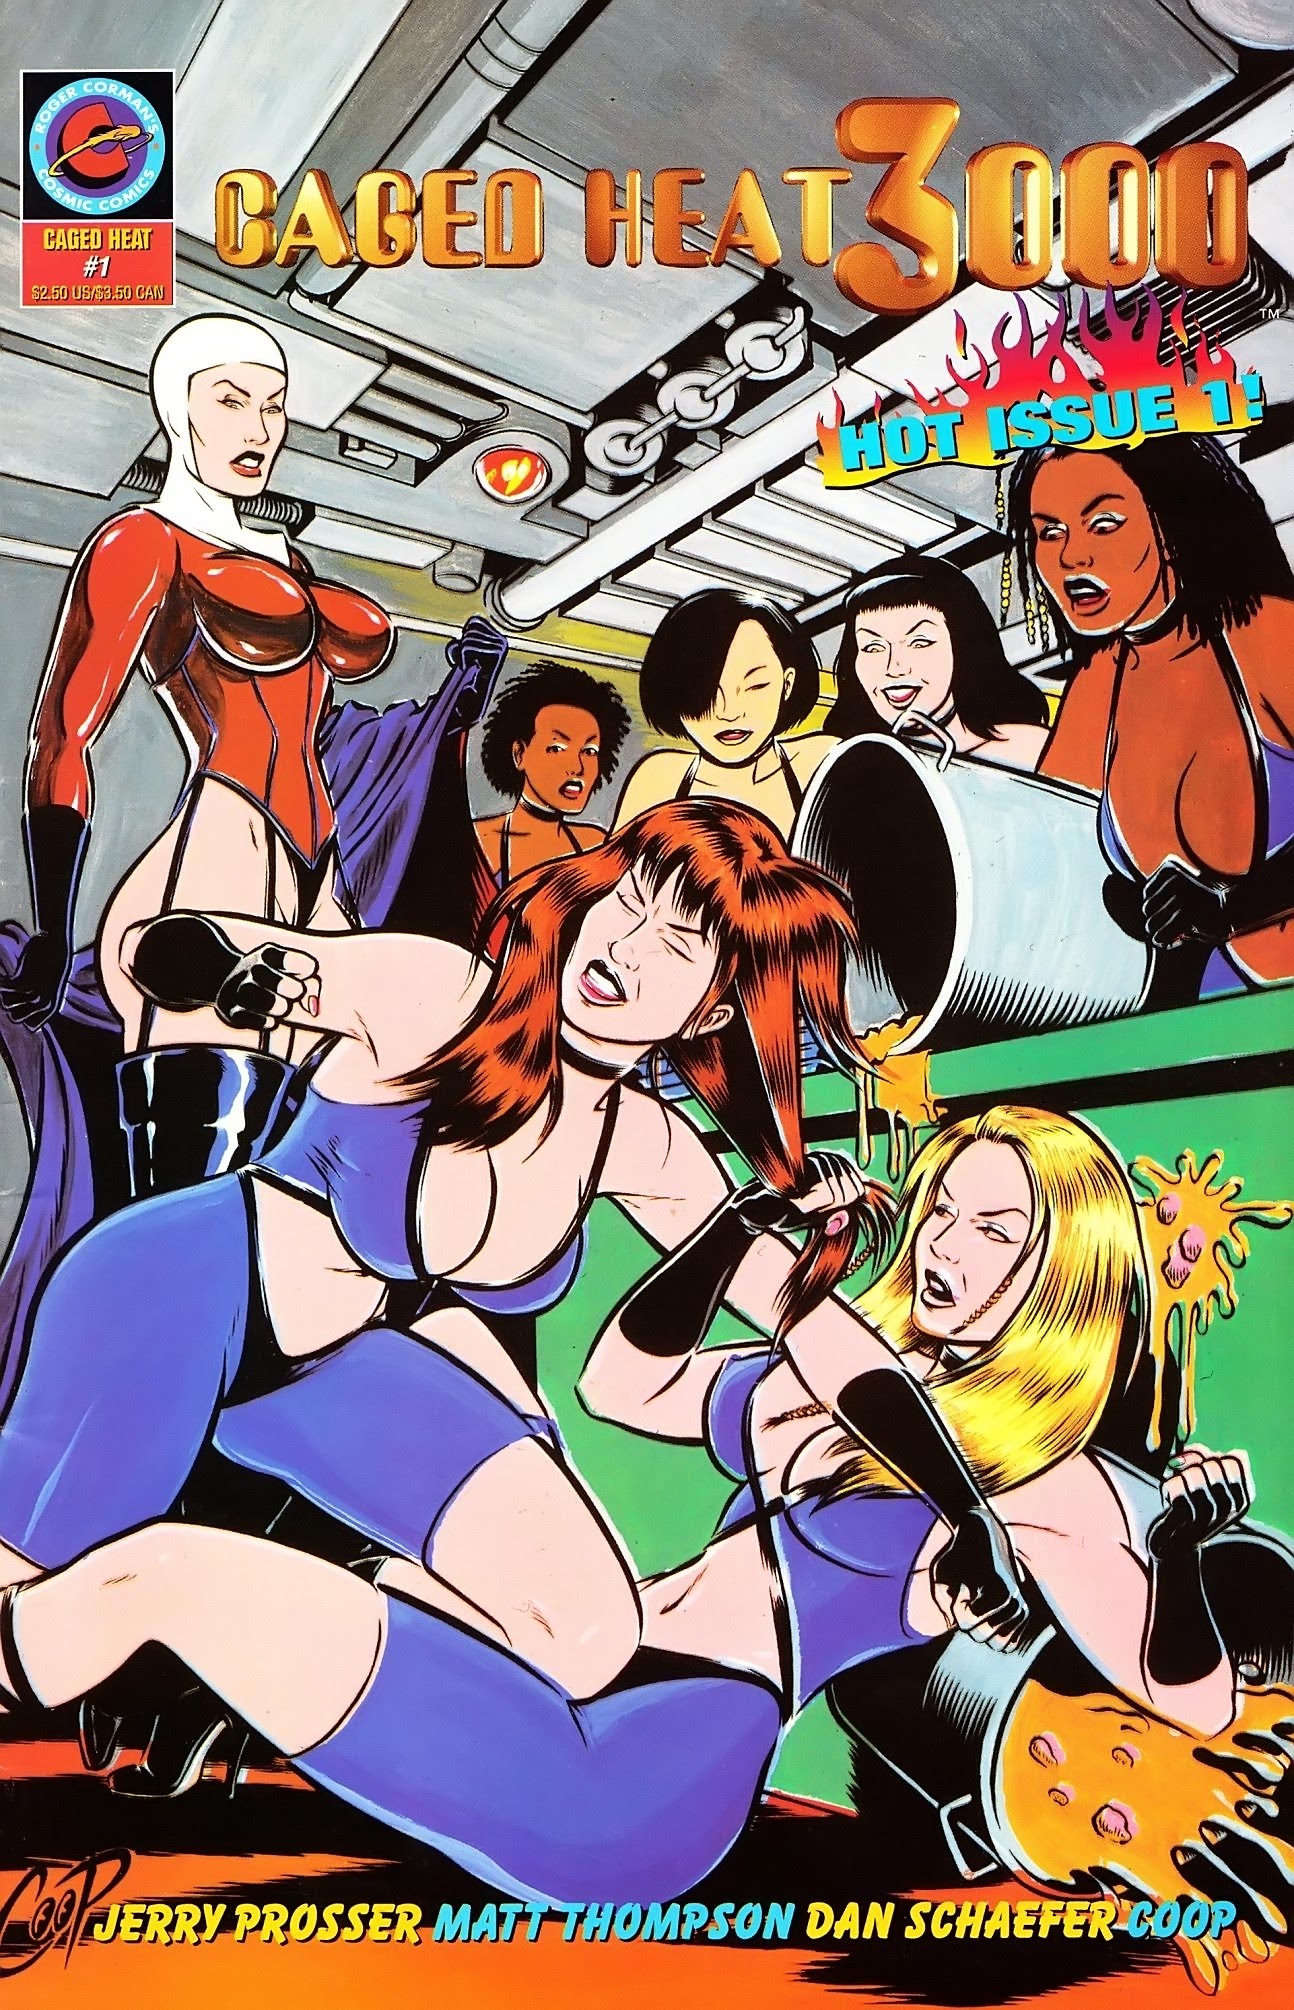 Read online Caged Heat 3000 comic -  Issue #1 - 1